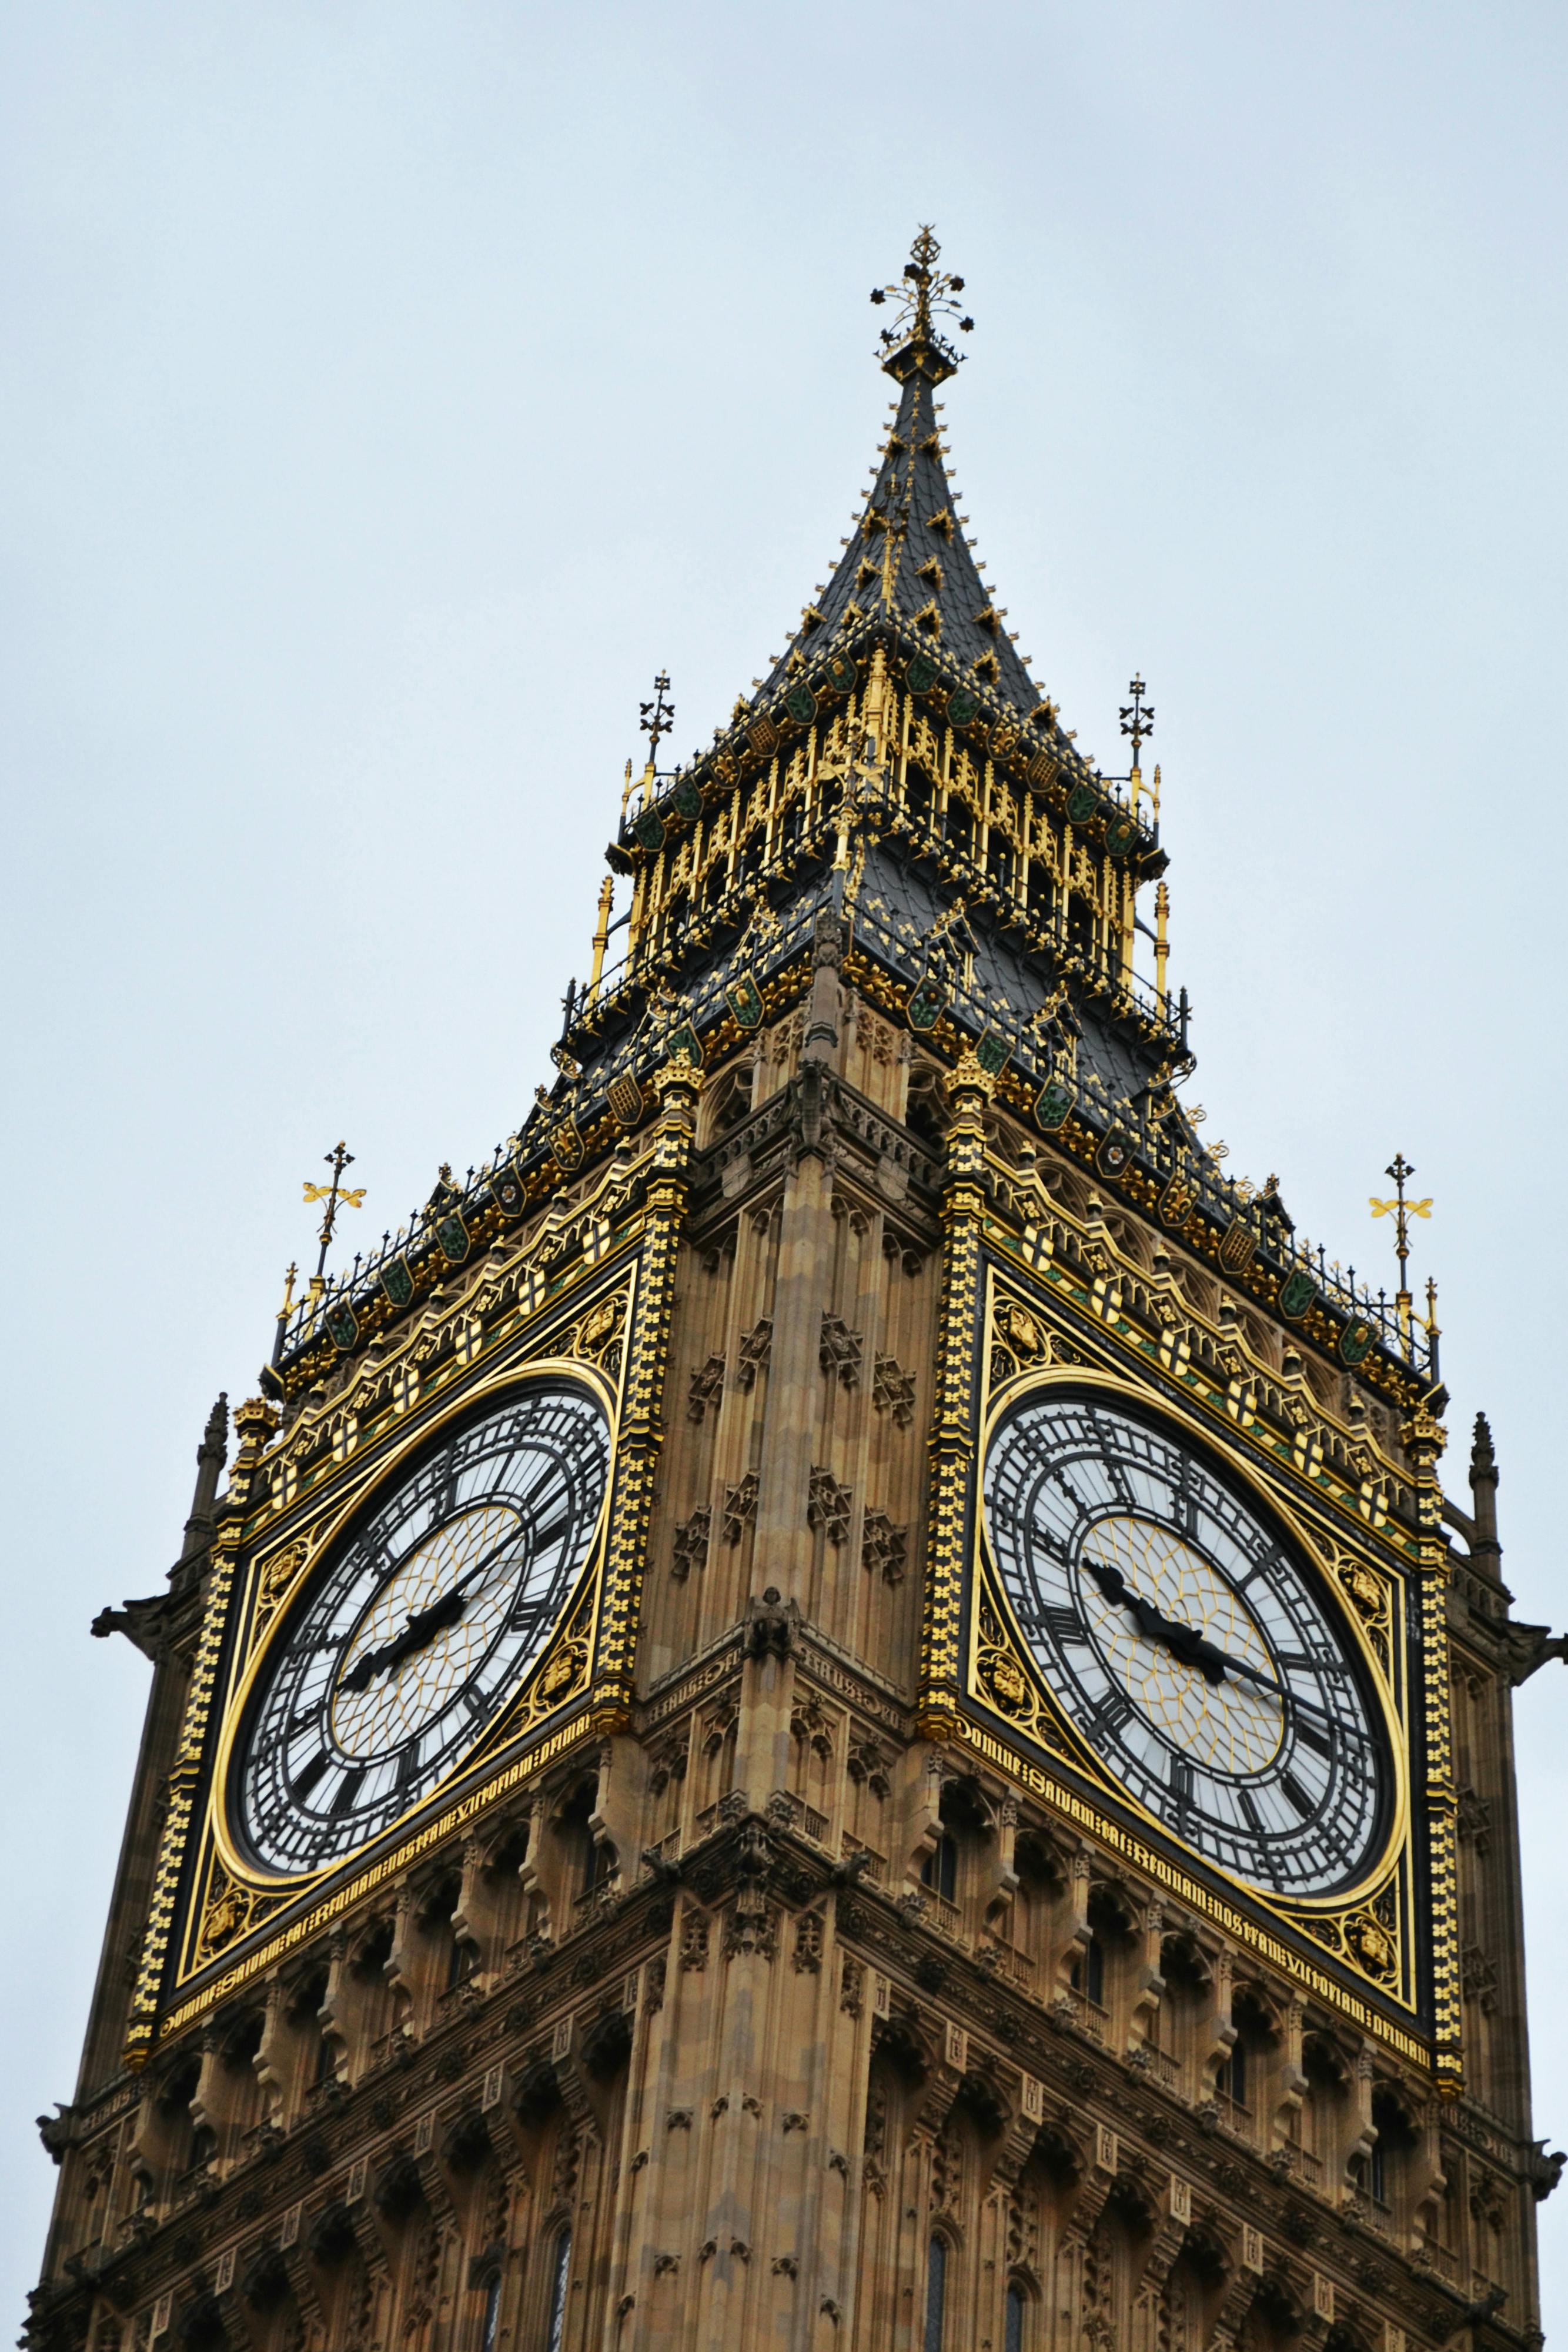 Free stock photo of Big Ben London, Palace of Westminster, the clock tower